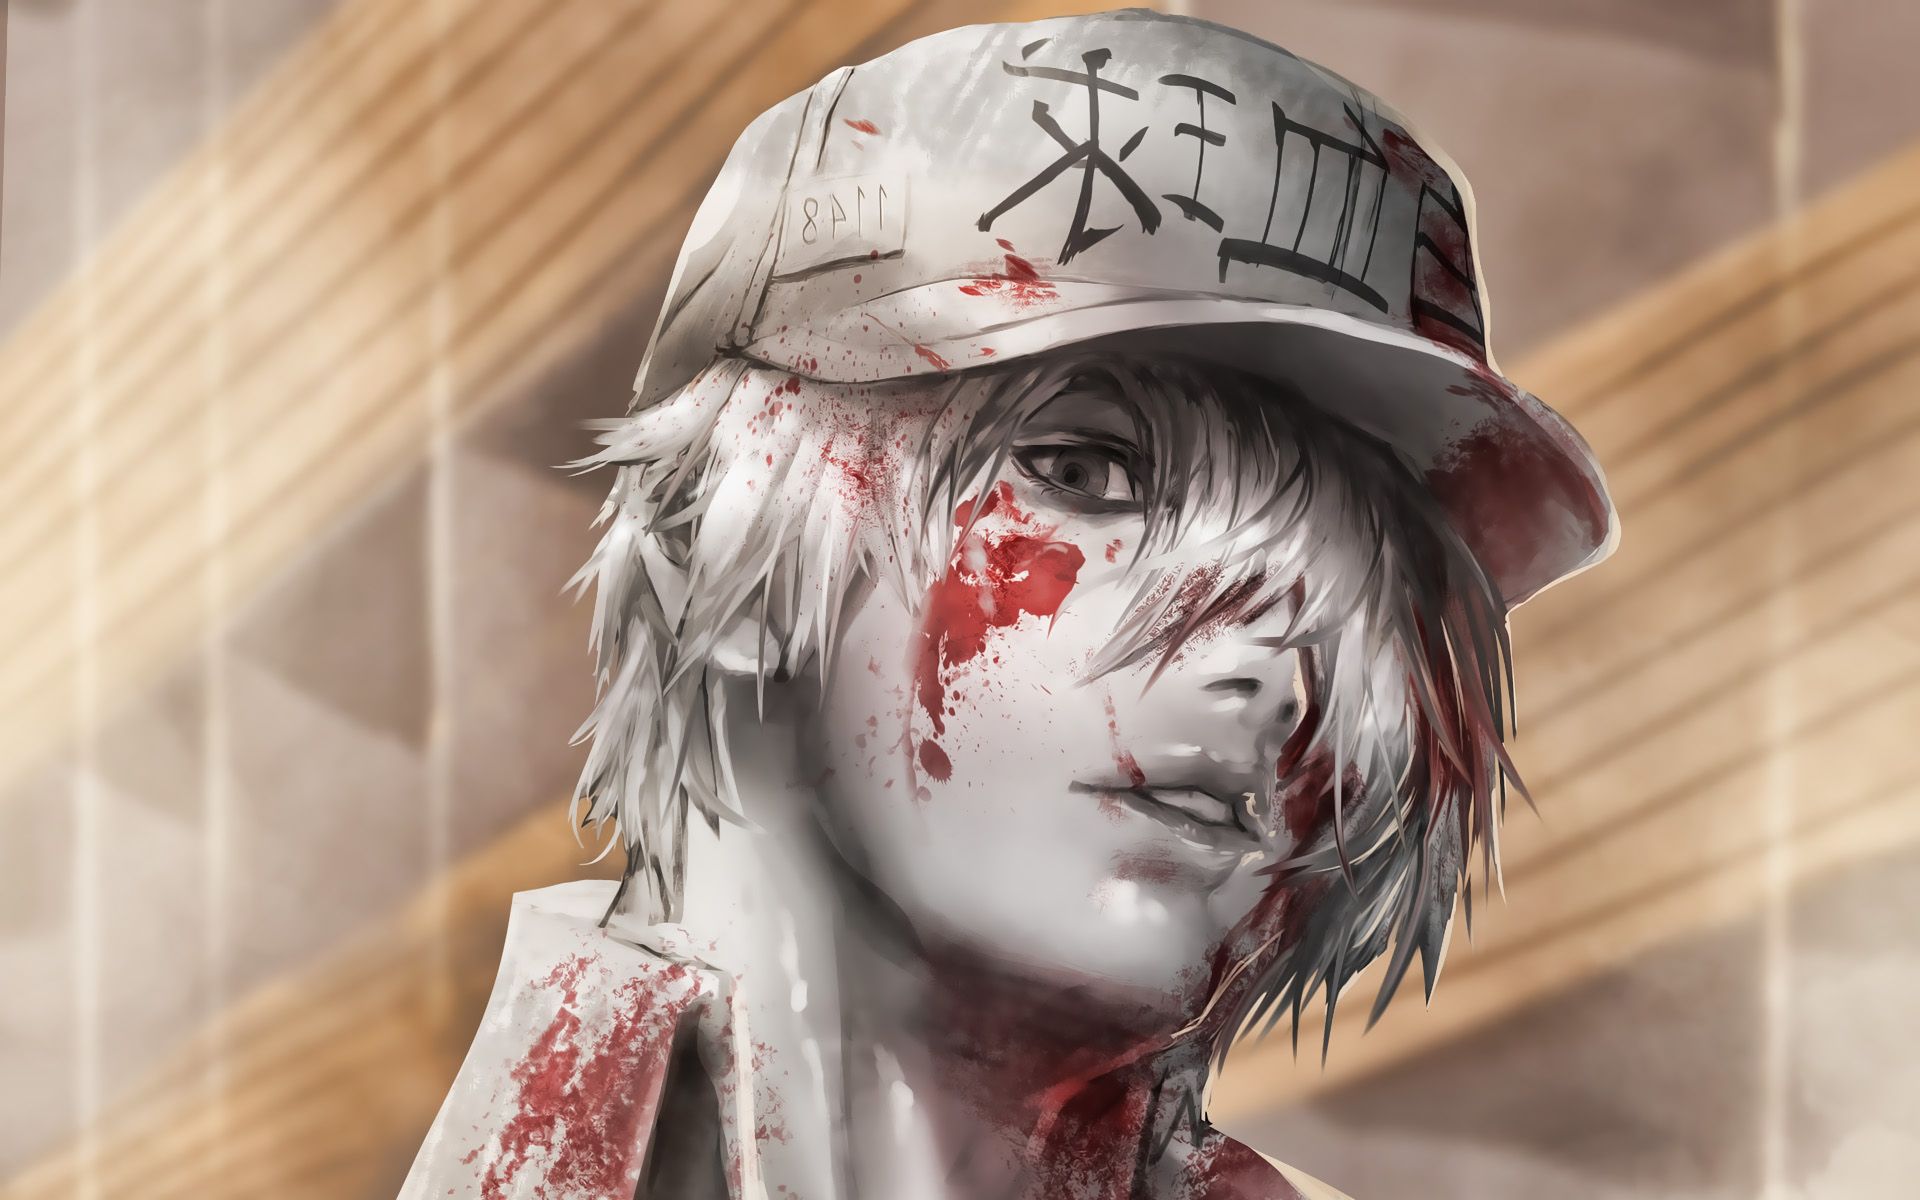 White Blood Cell Cells at Work HD 4K Wallpaper #5.3020